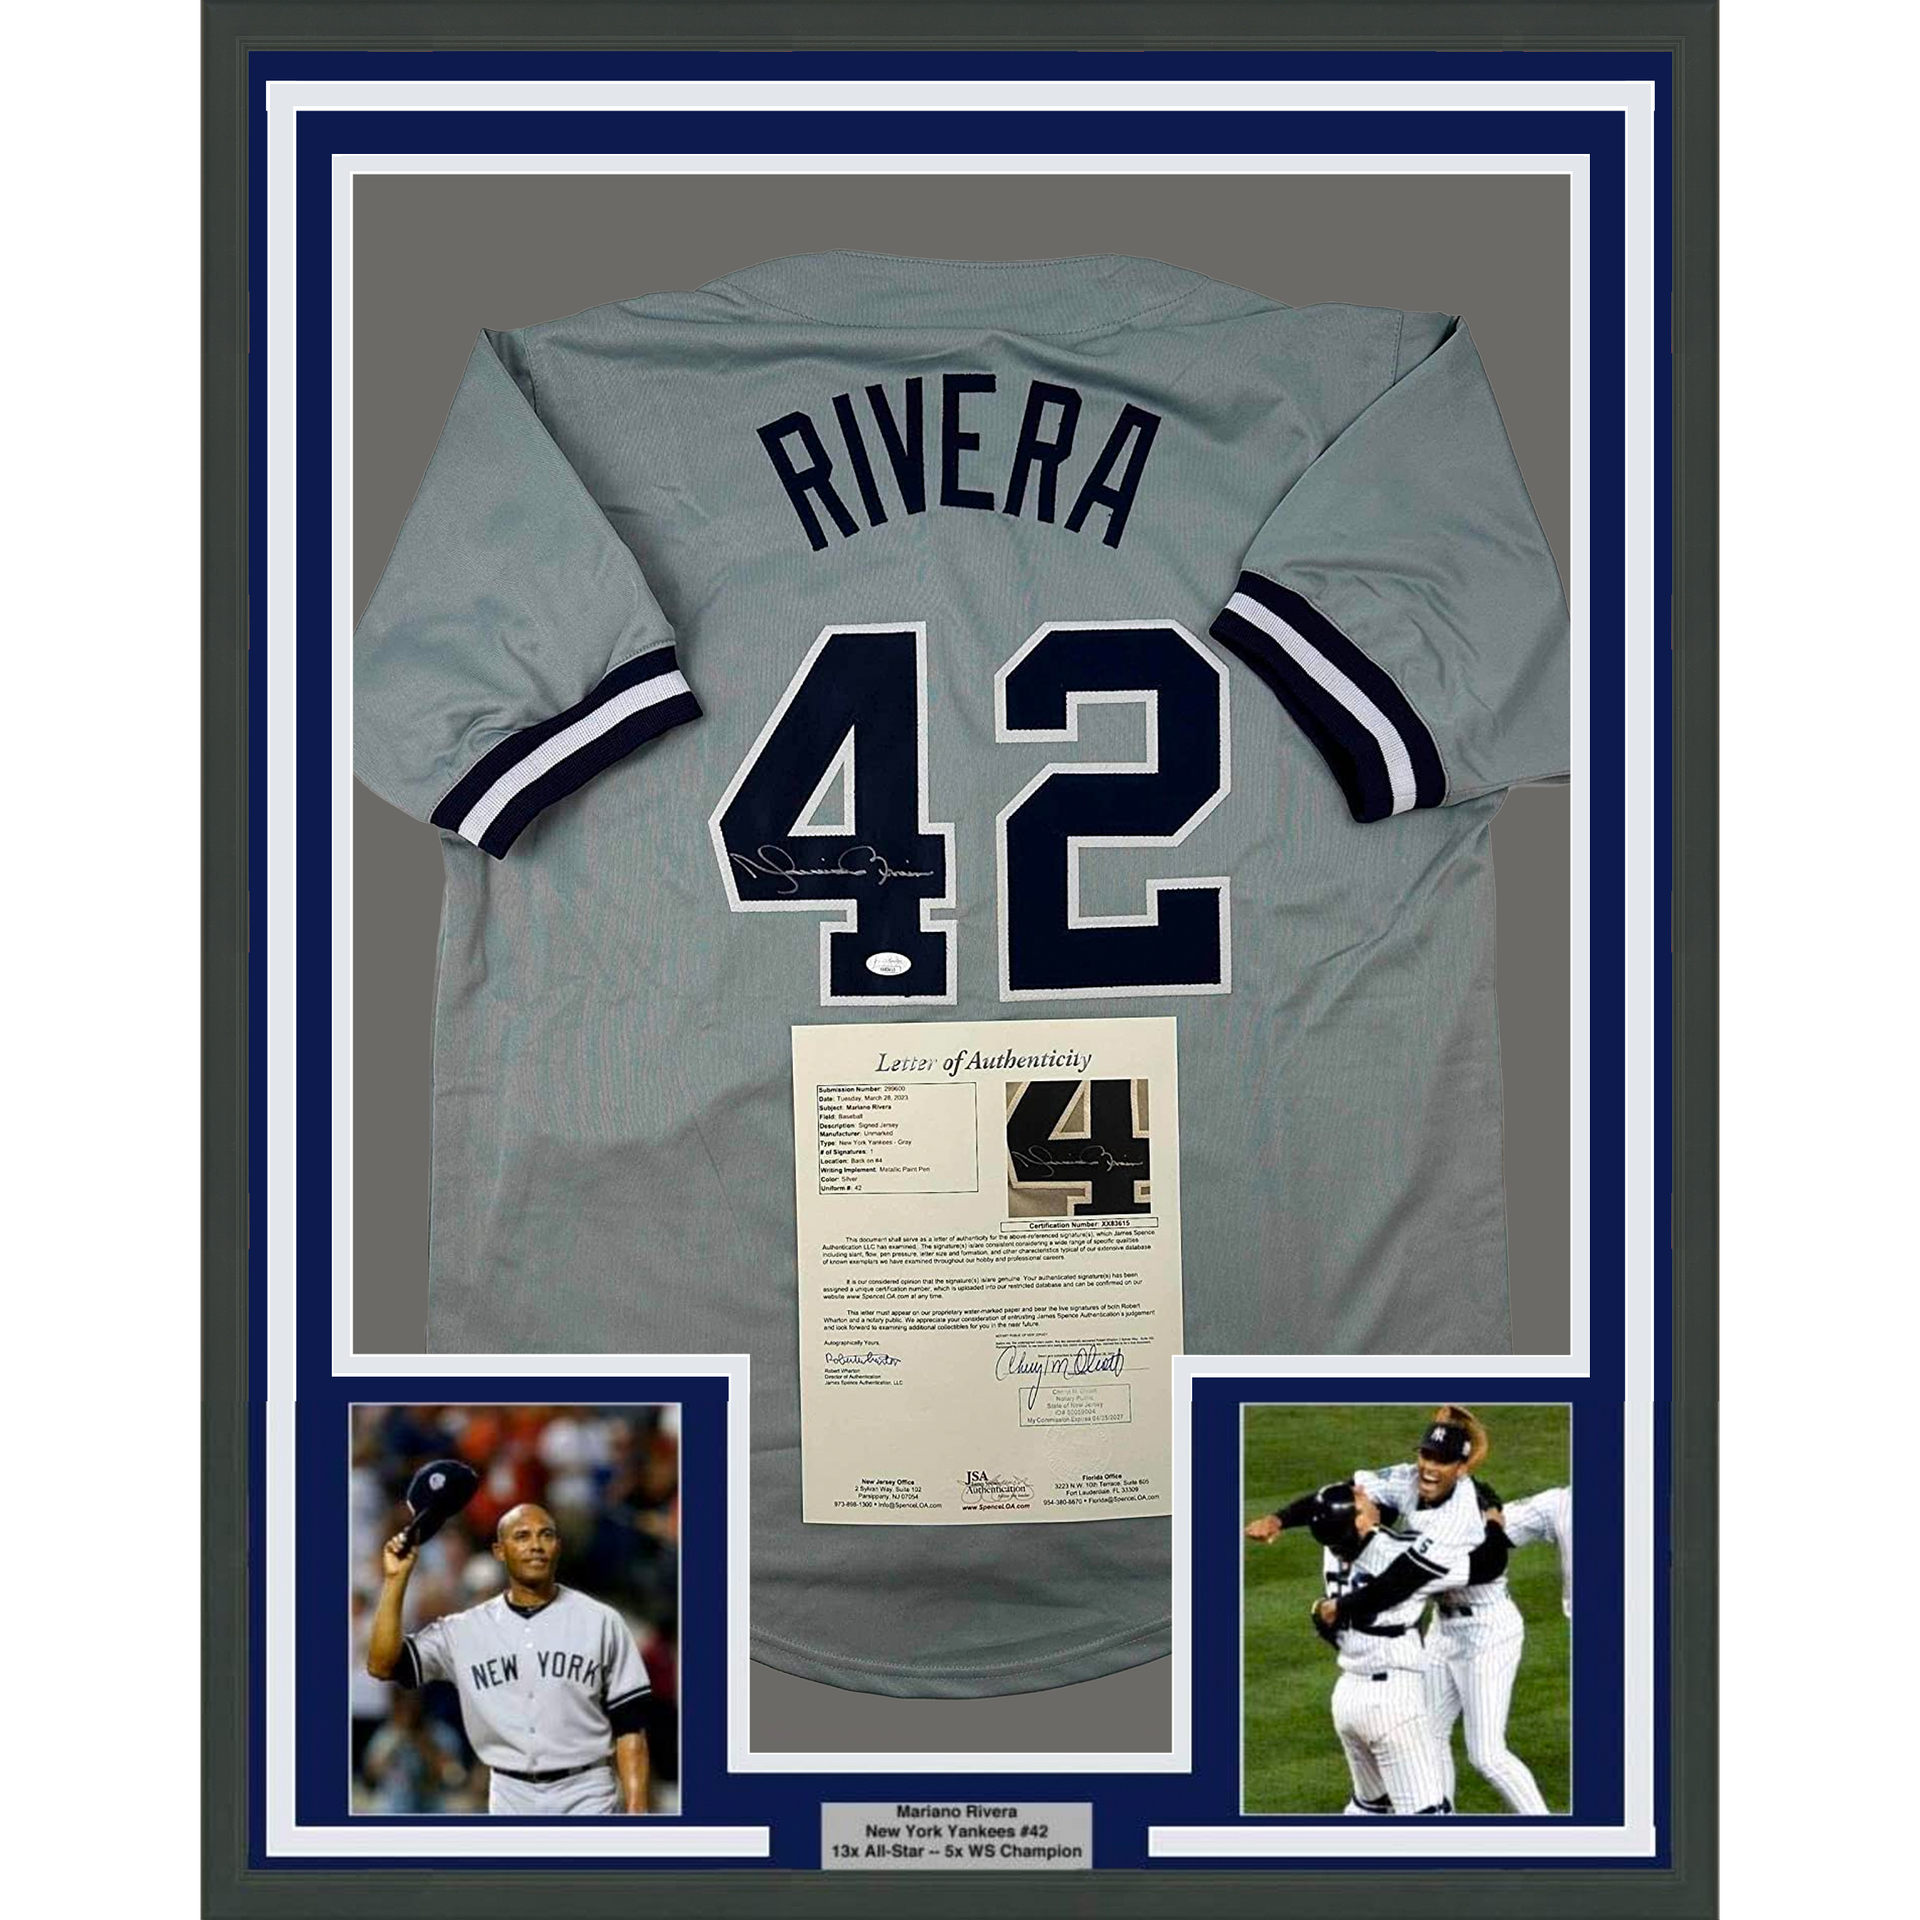 Mariano Rivera Autographed Framed Yankees Jersey